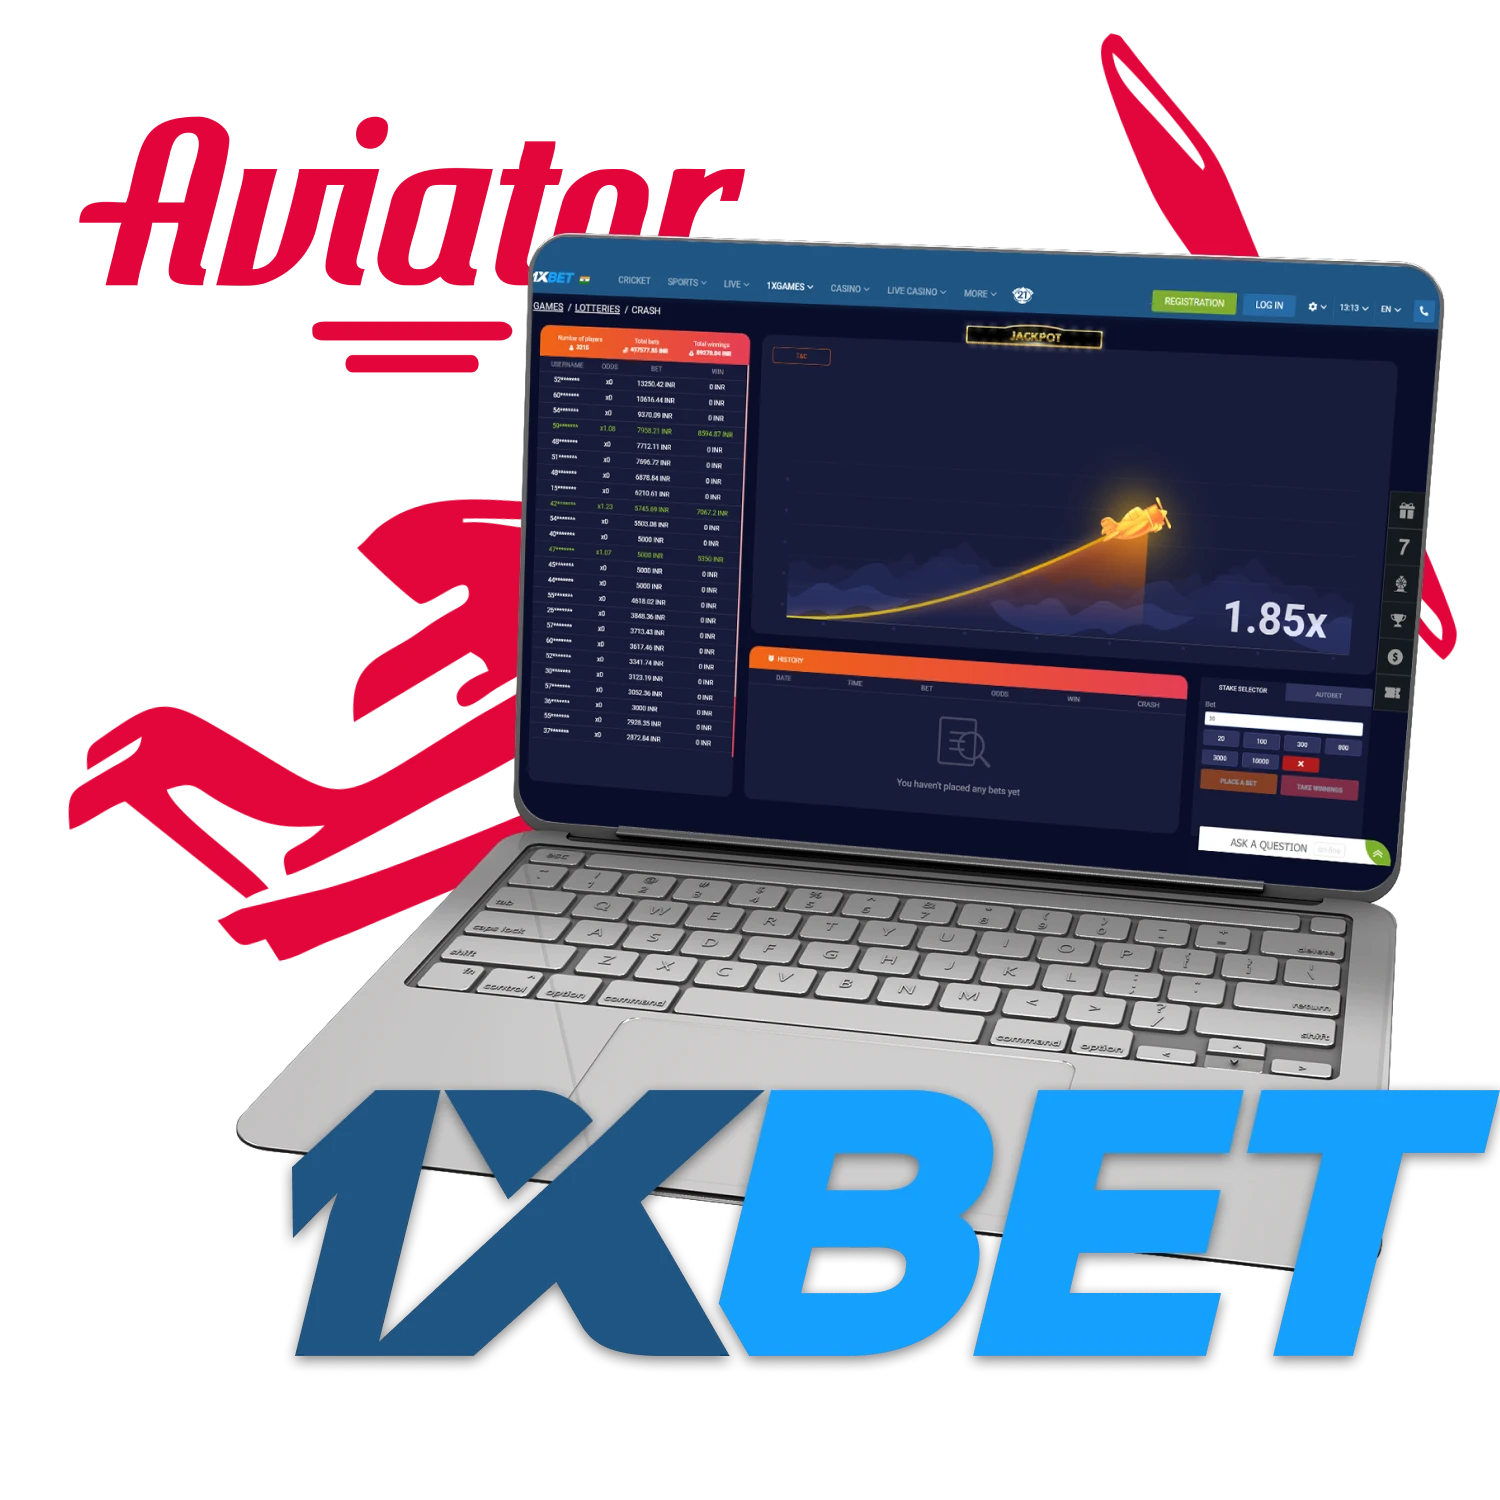 Learn more about Aviator on the 1xbet website.